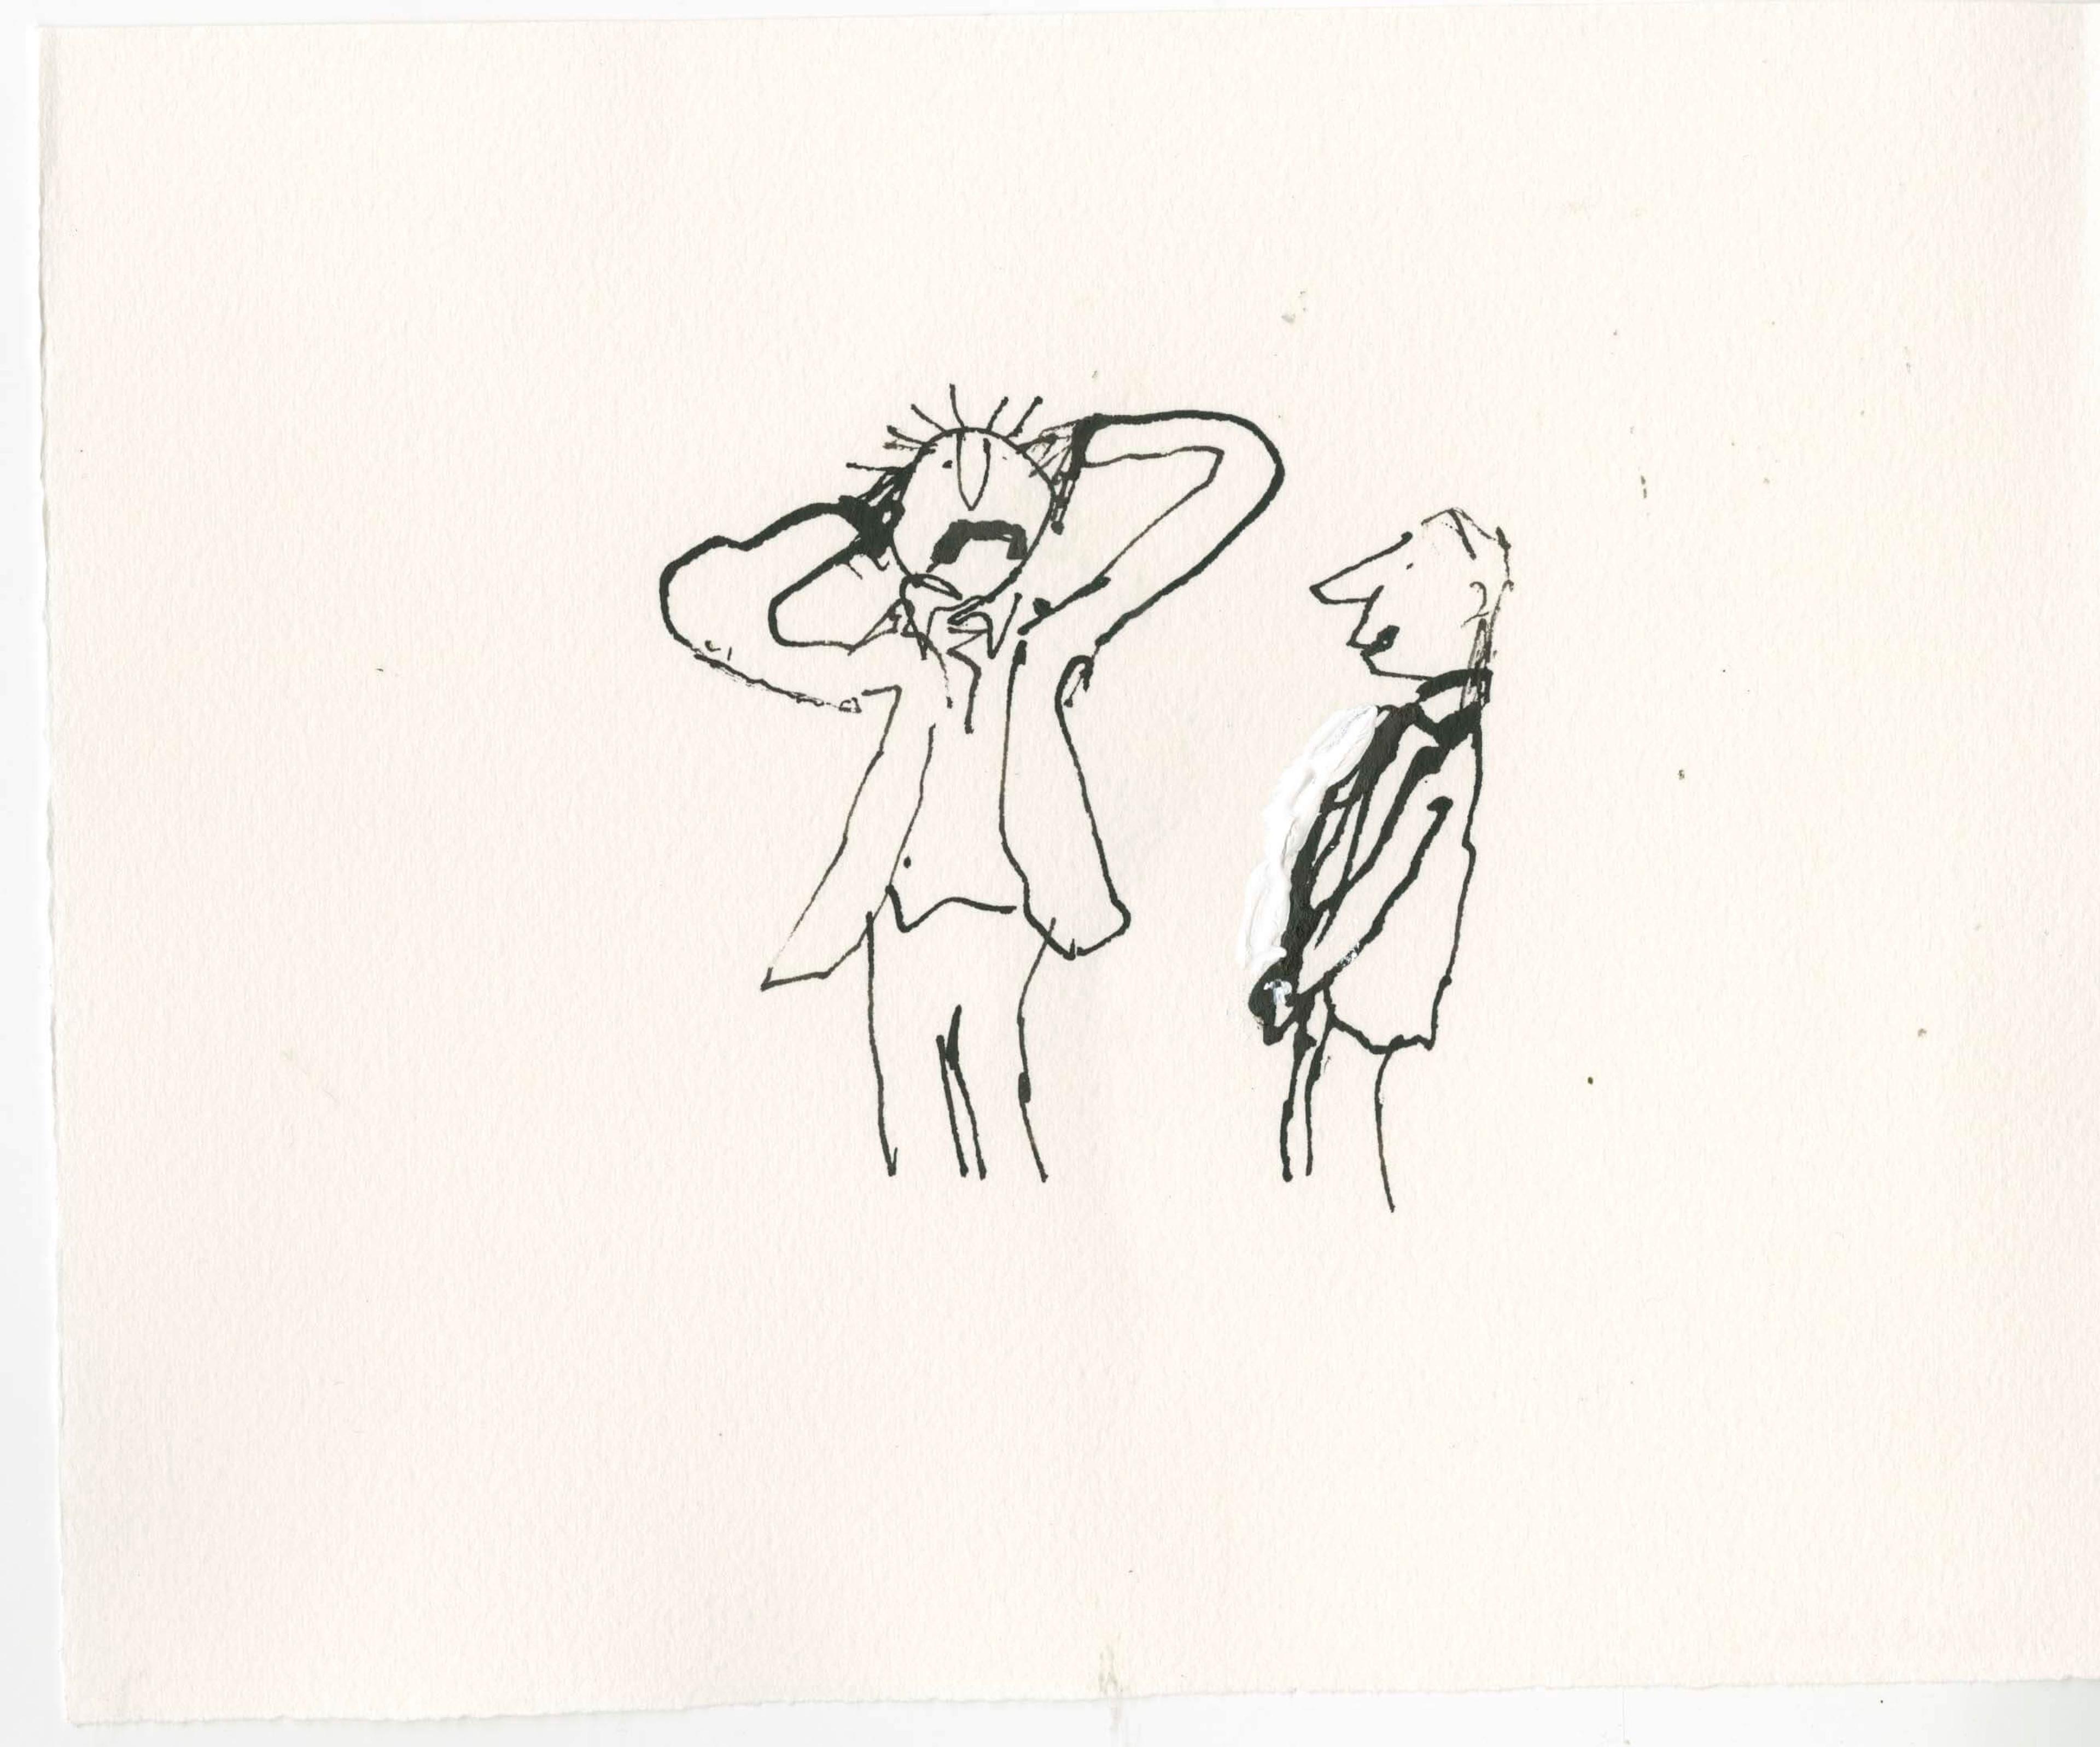 Simple drawing of an interaction between a frazzled man and a smiling man